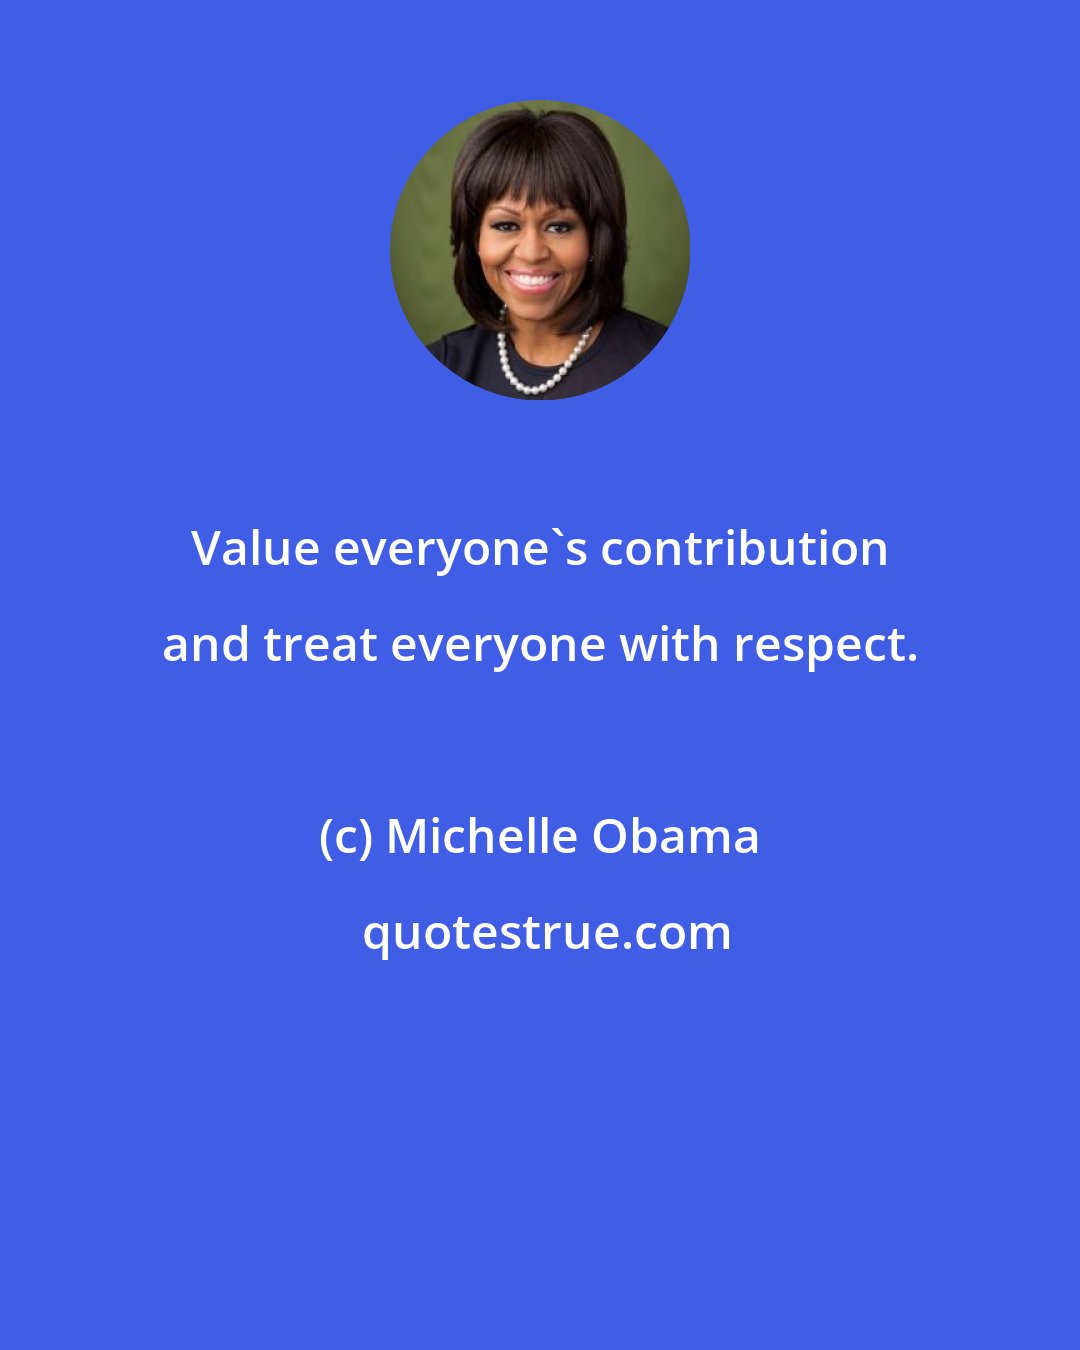 Michelle Obama: Value everyone's contribution and treat everyone with respect.